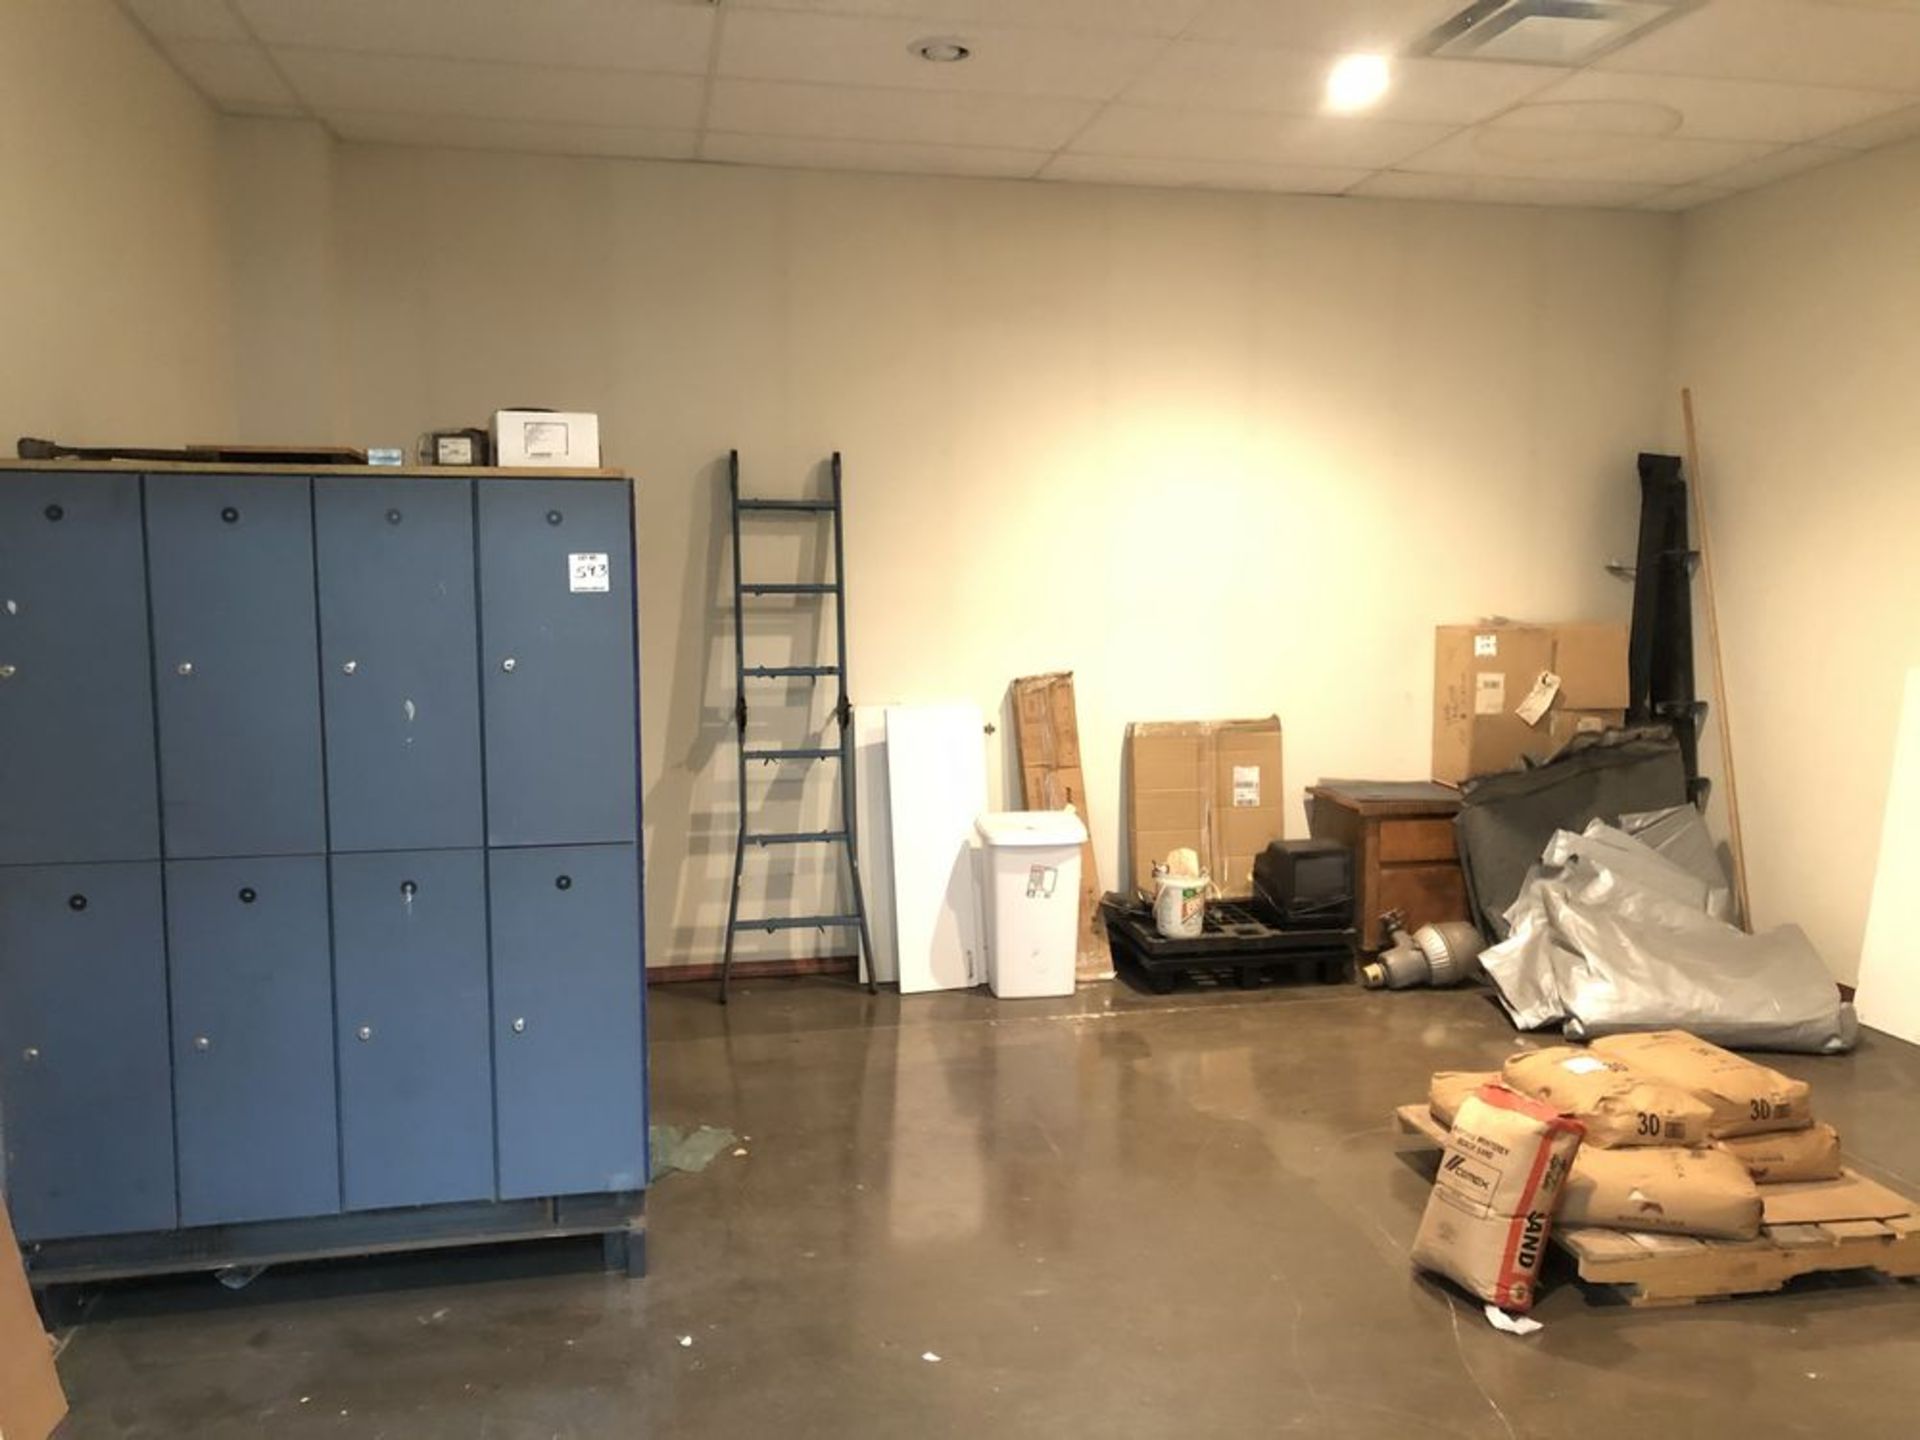 Lot: contents of room- lockers, ladder, bench stand, tarp, desk